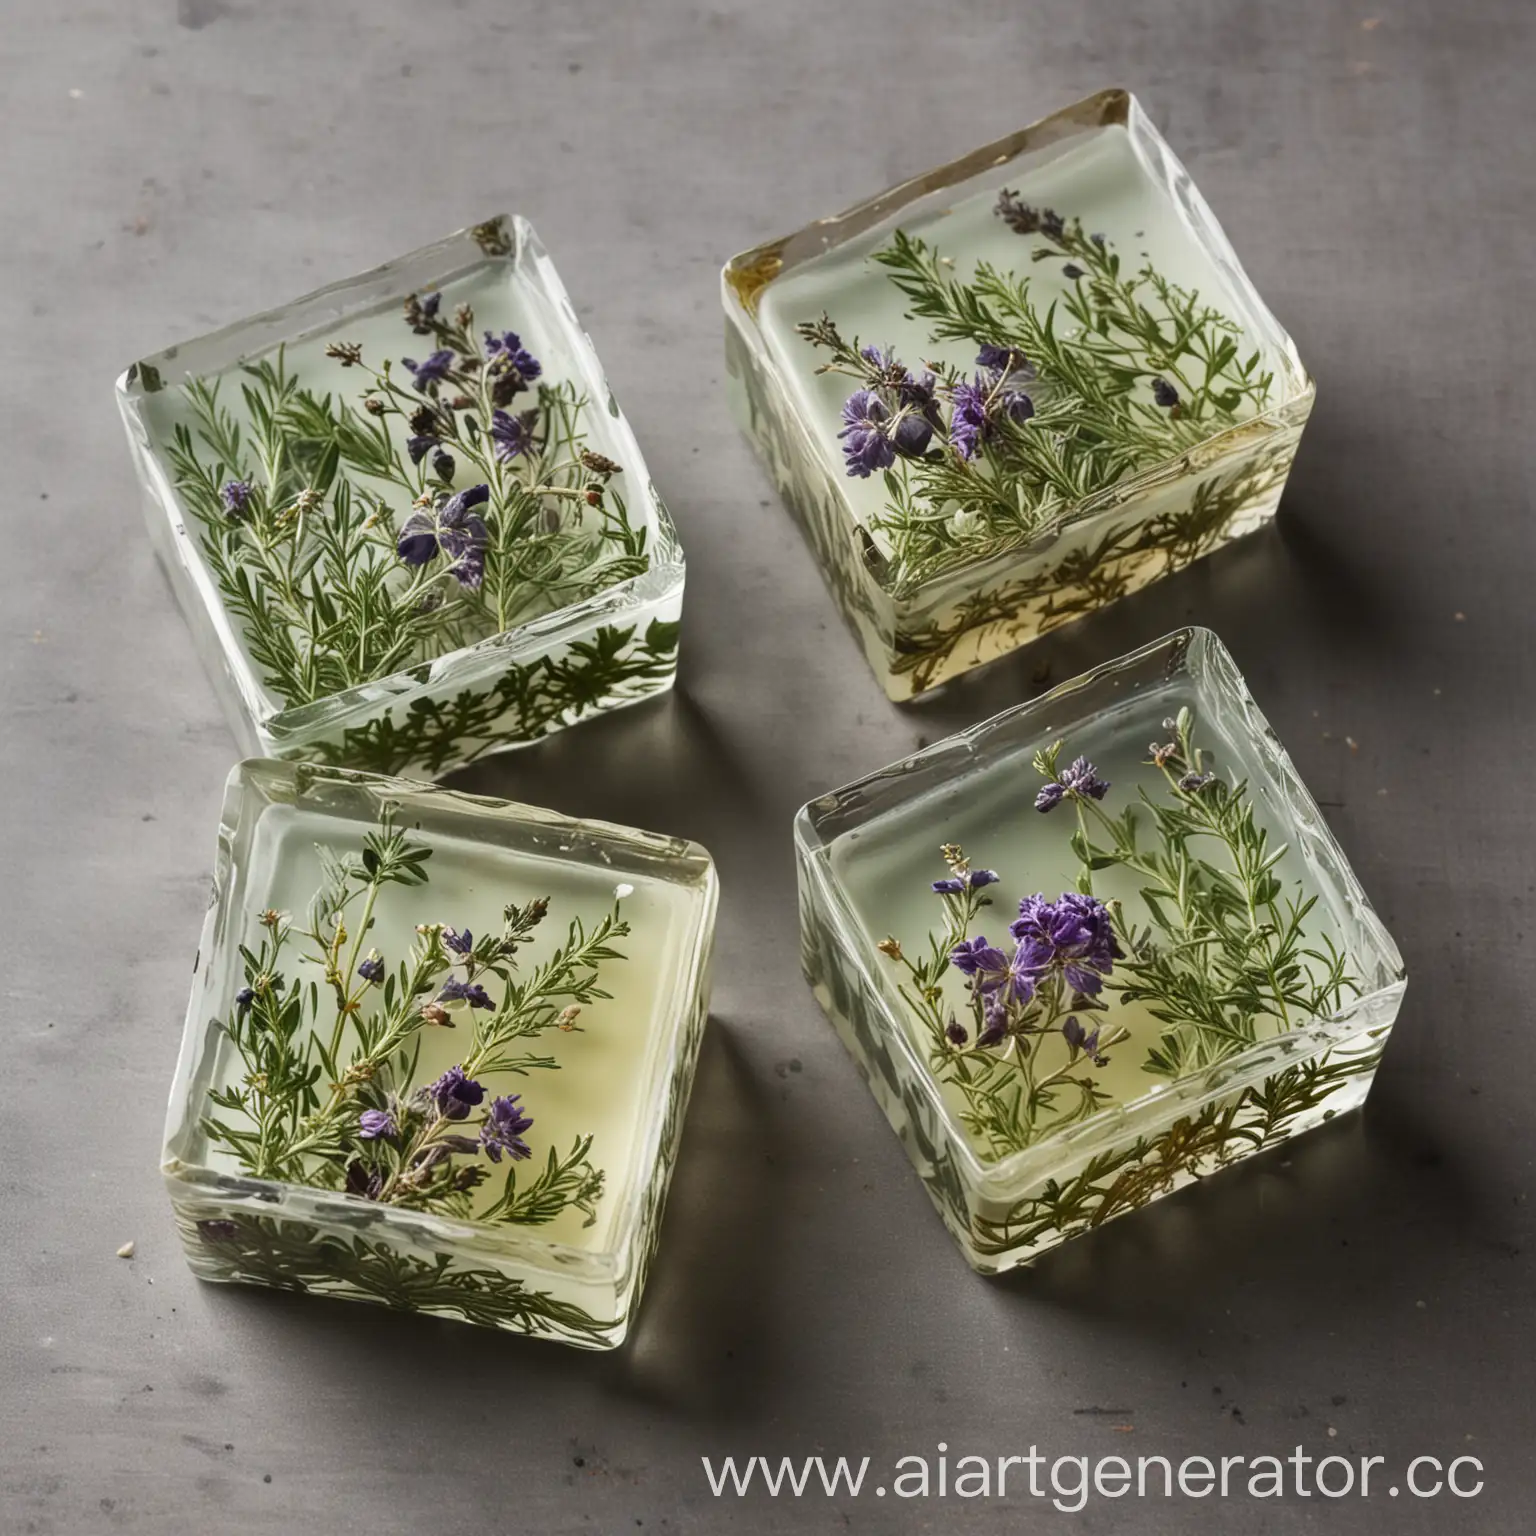 Transparent-Soap-with-Fragrant-Herb-Infusions